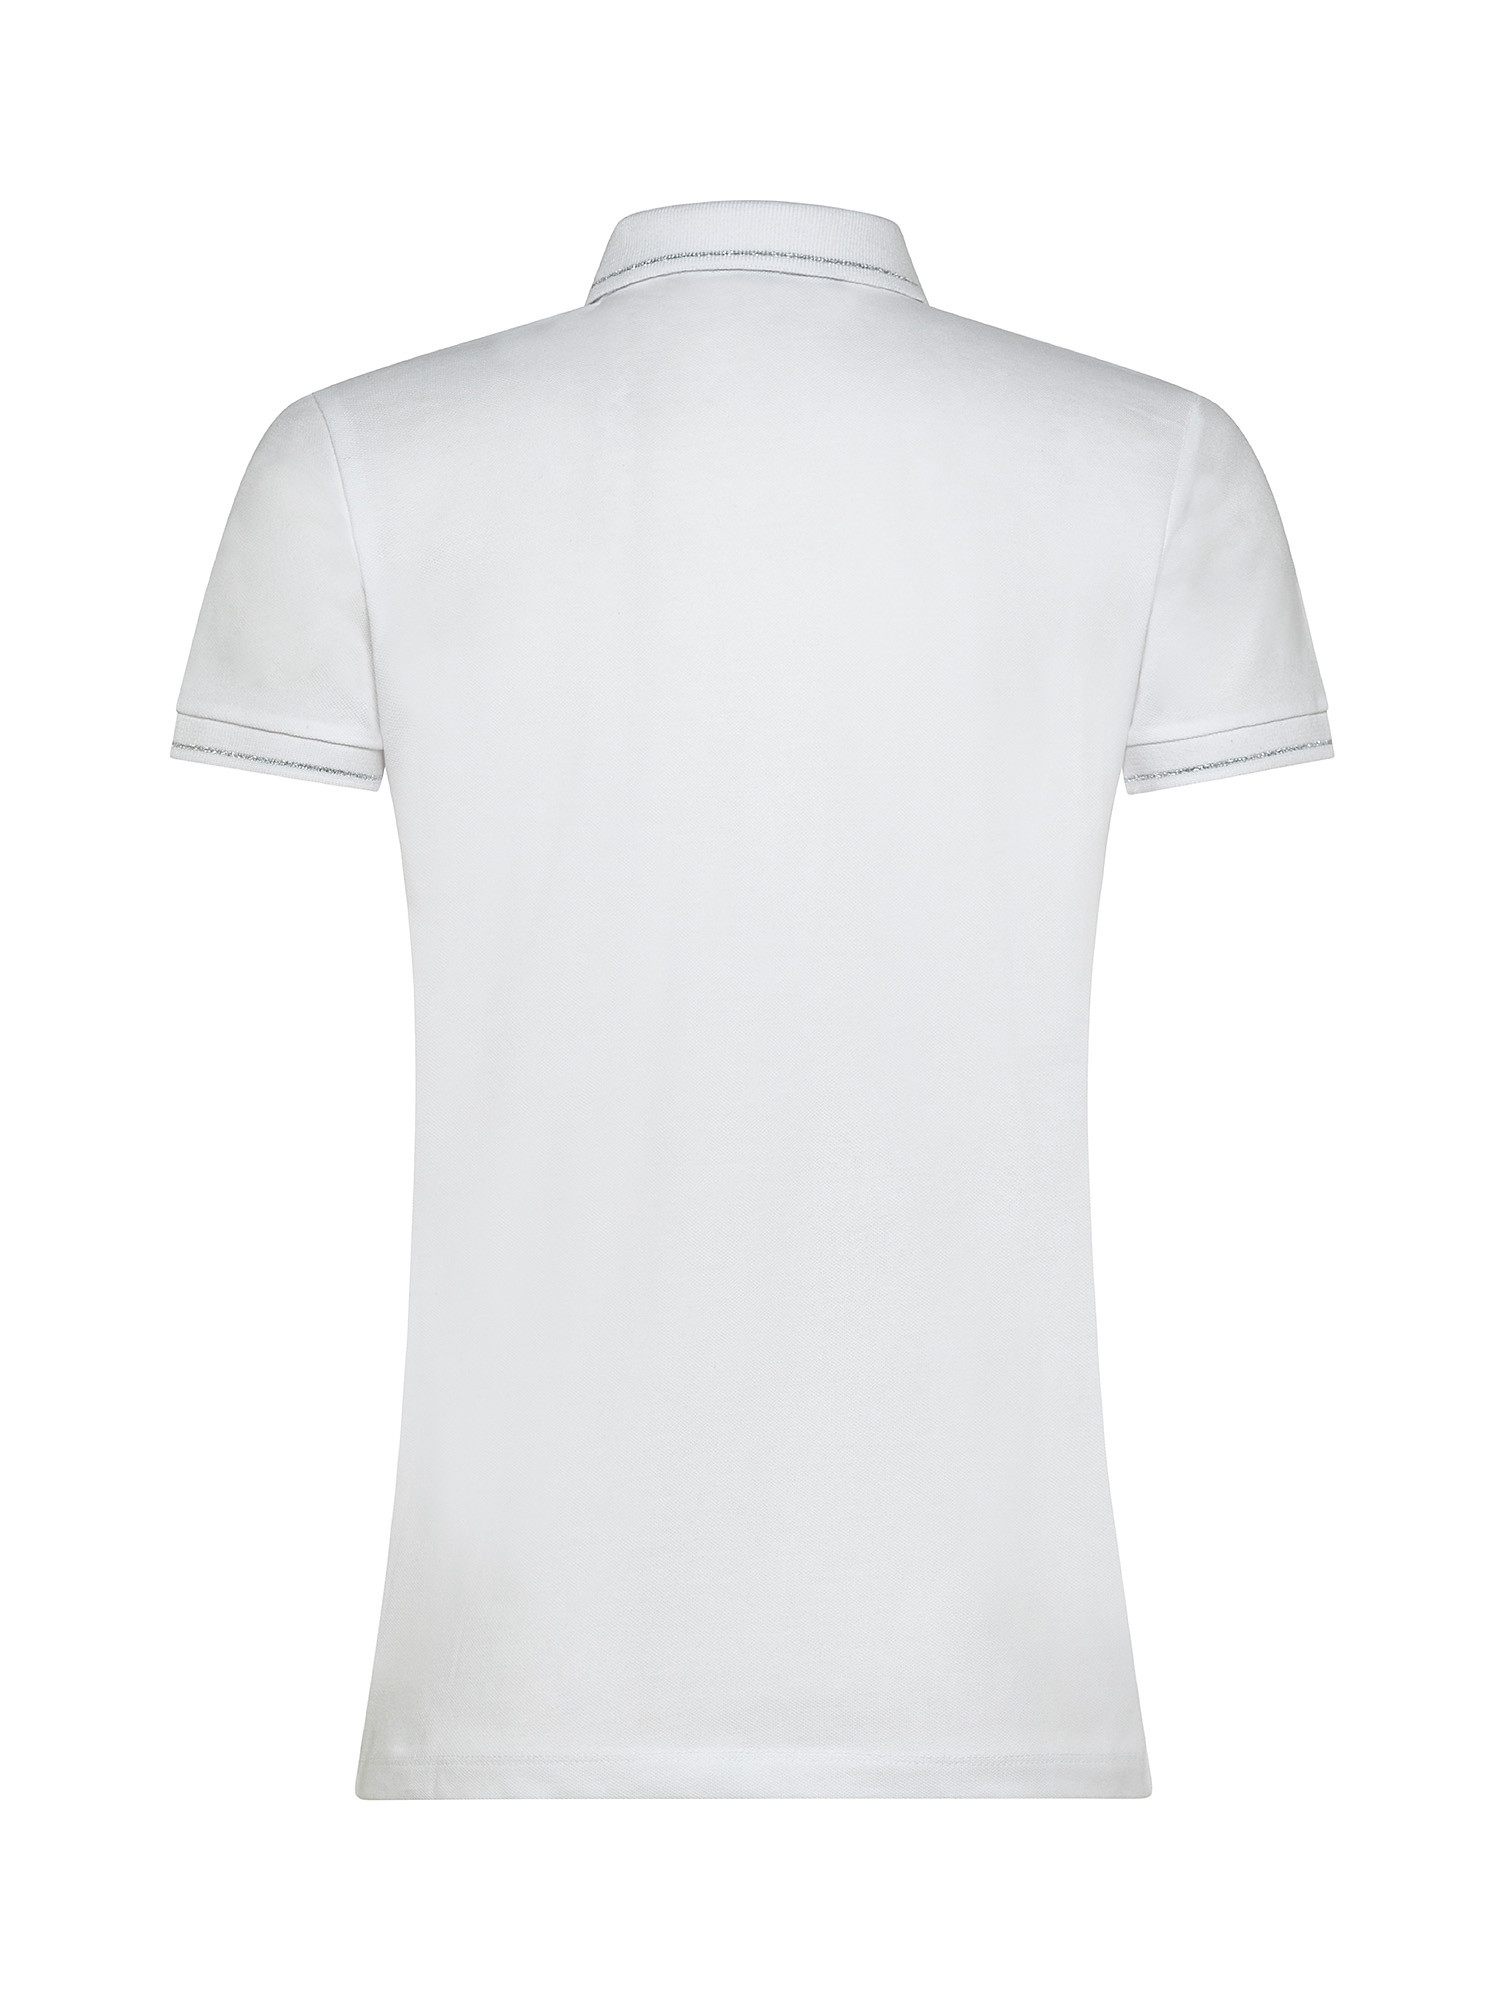 Polo shirt with lurex details, White, large image number 1